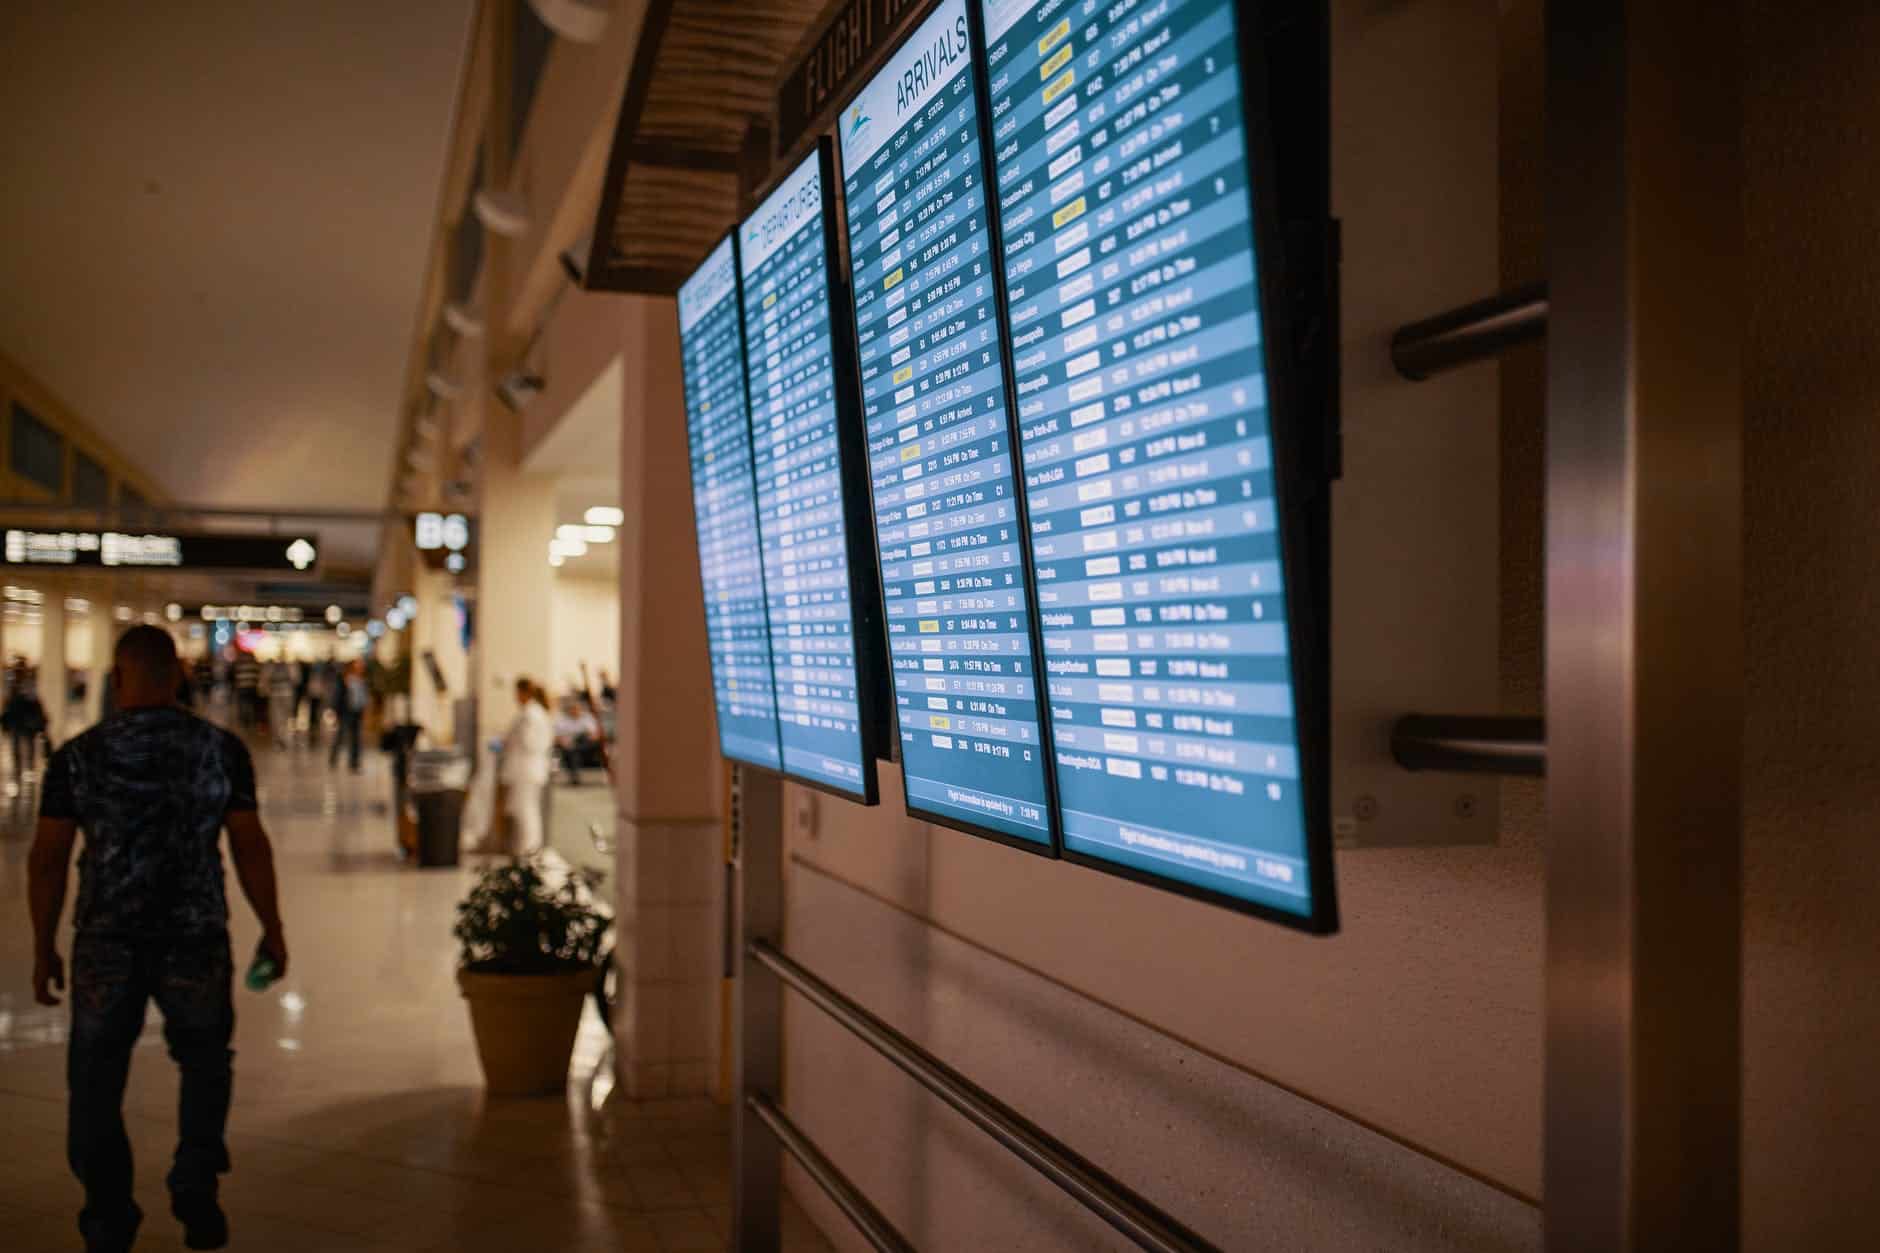 Canadian airports can expect considerable delays over the holidays